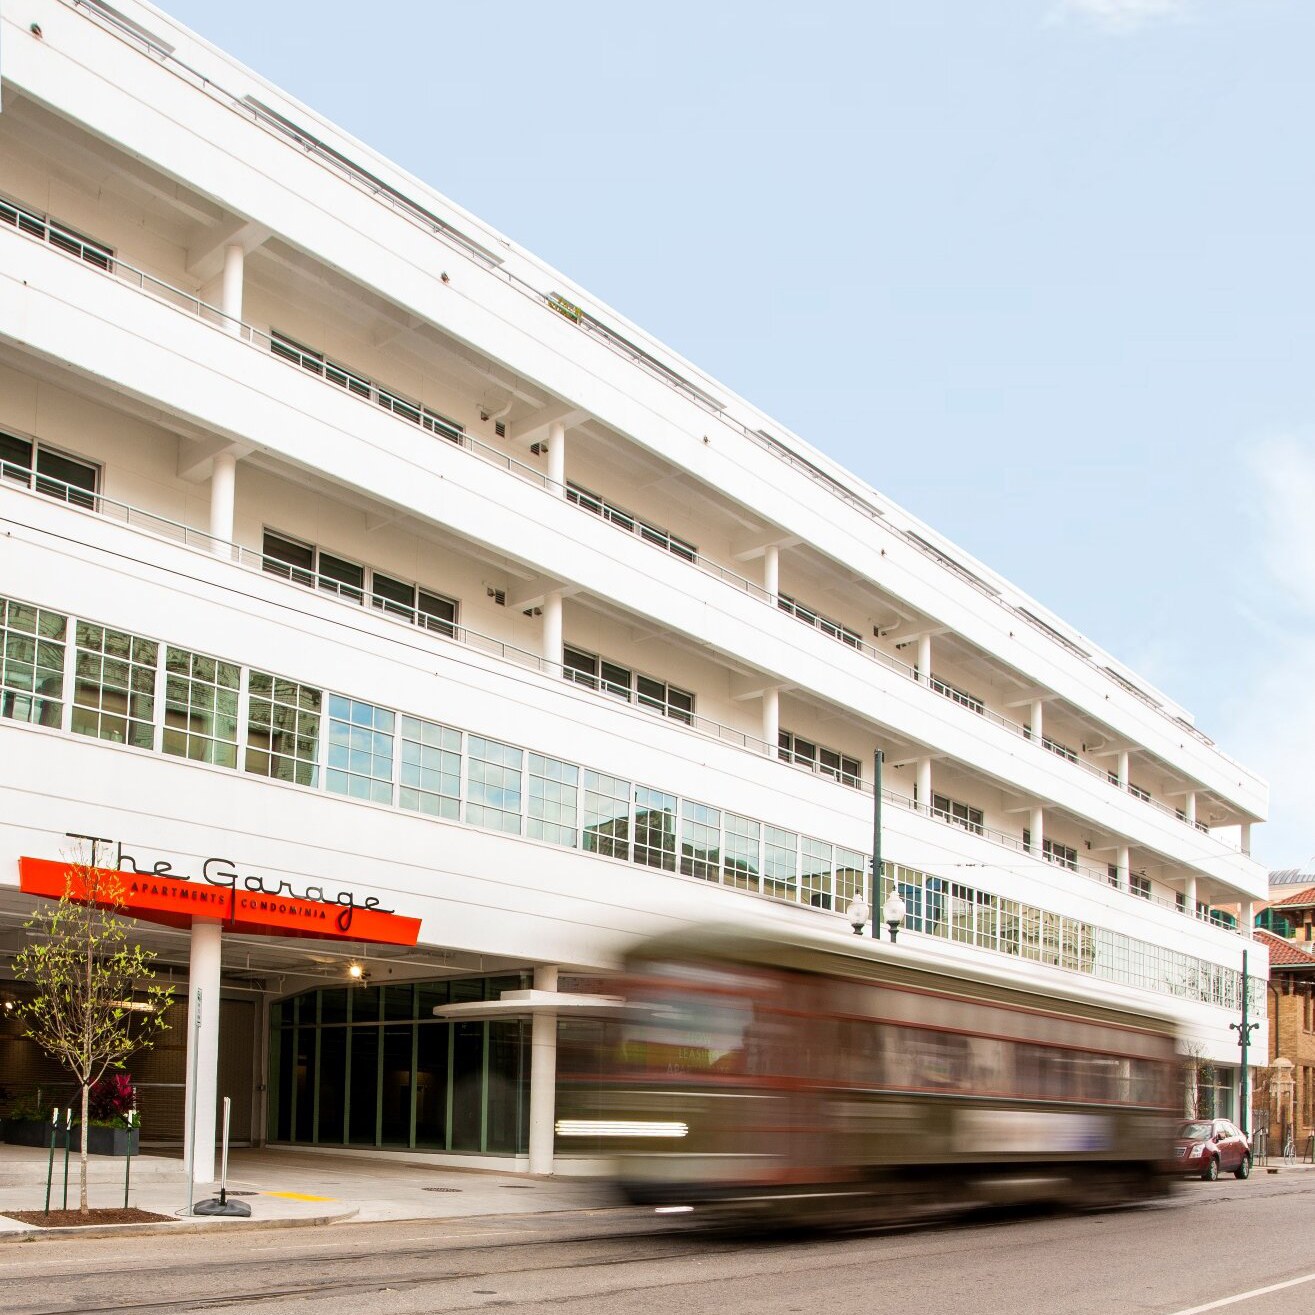 Exterior of "The Garage" with streetcar speeding by 